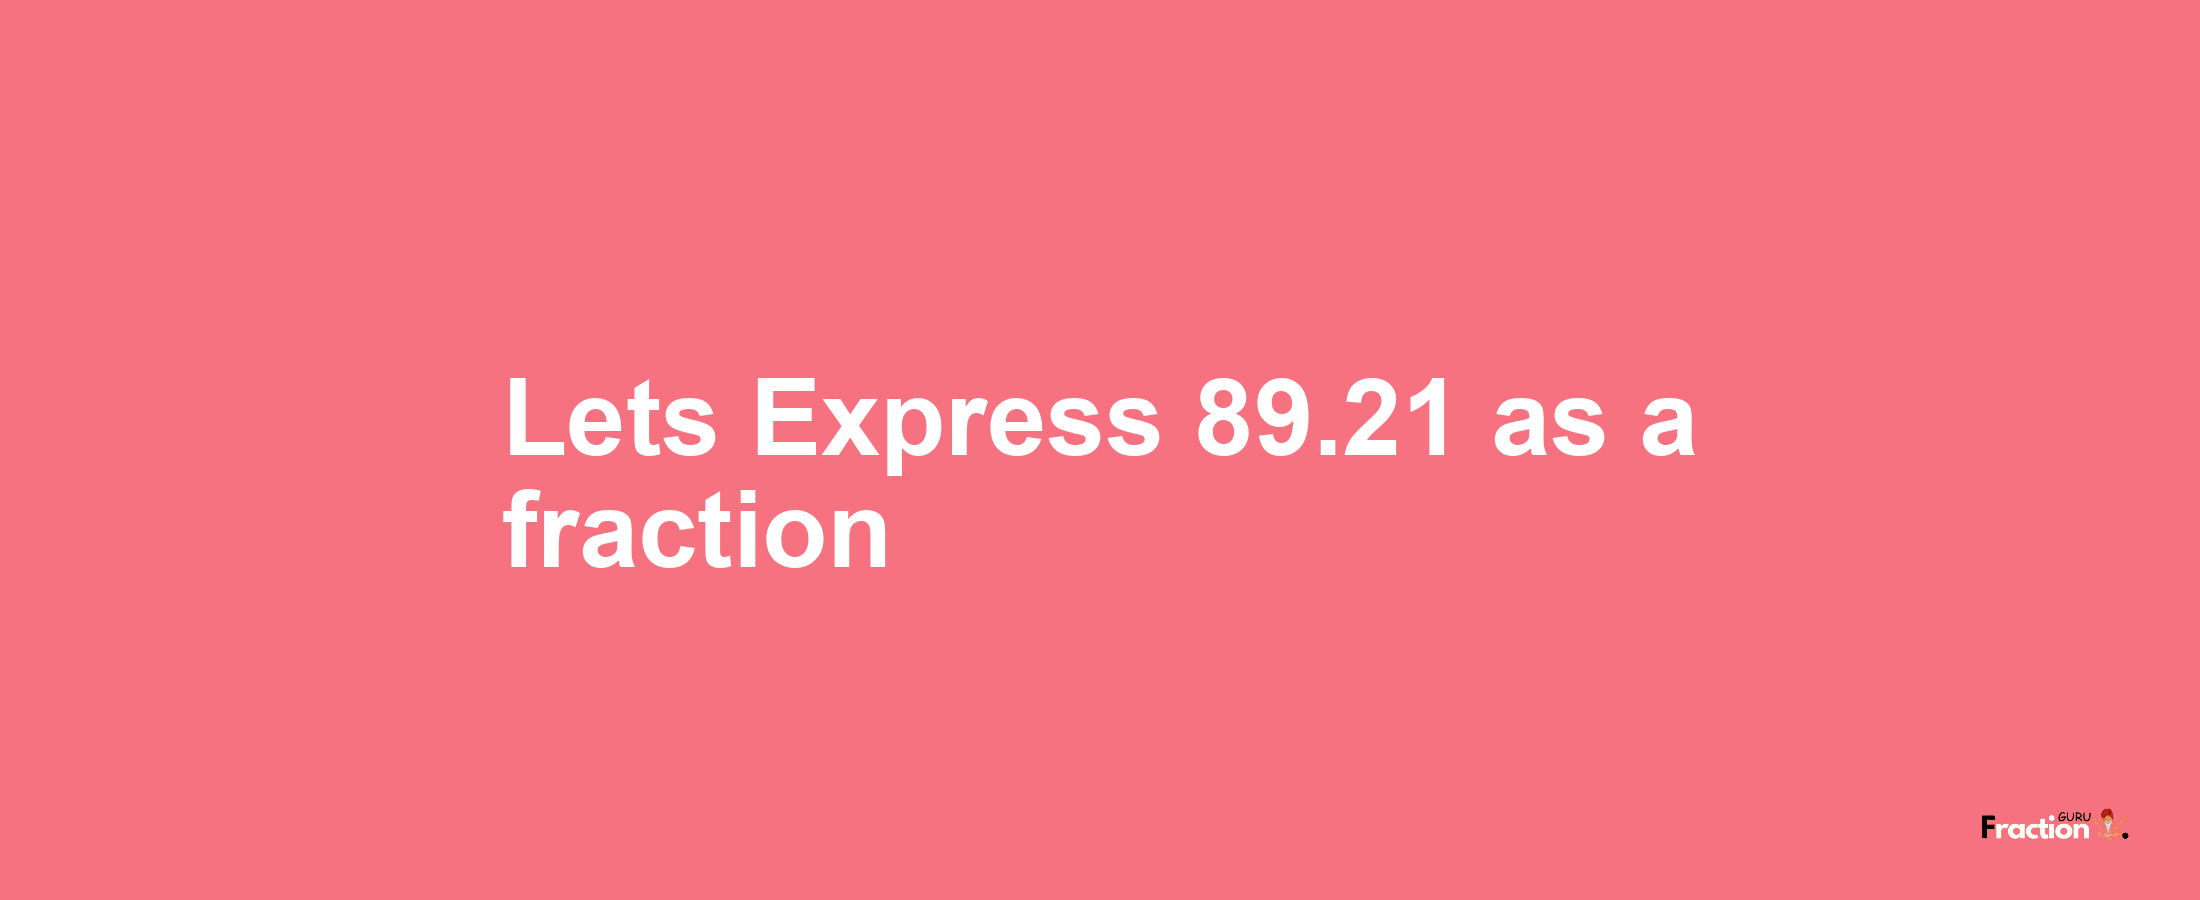 Lets Express 89.21 as afraction